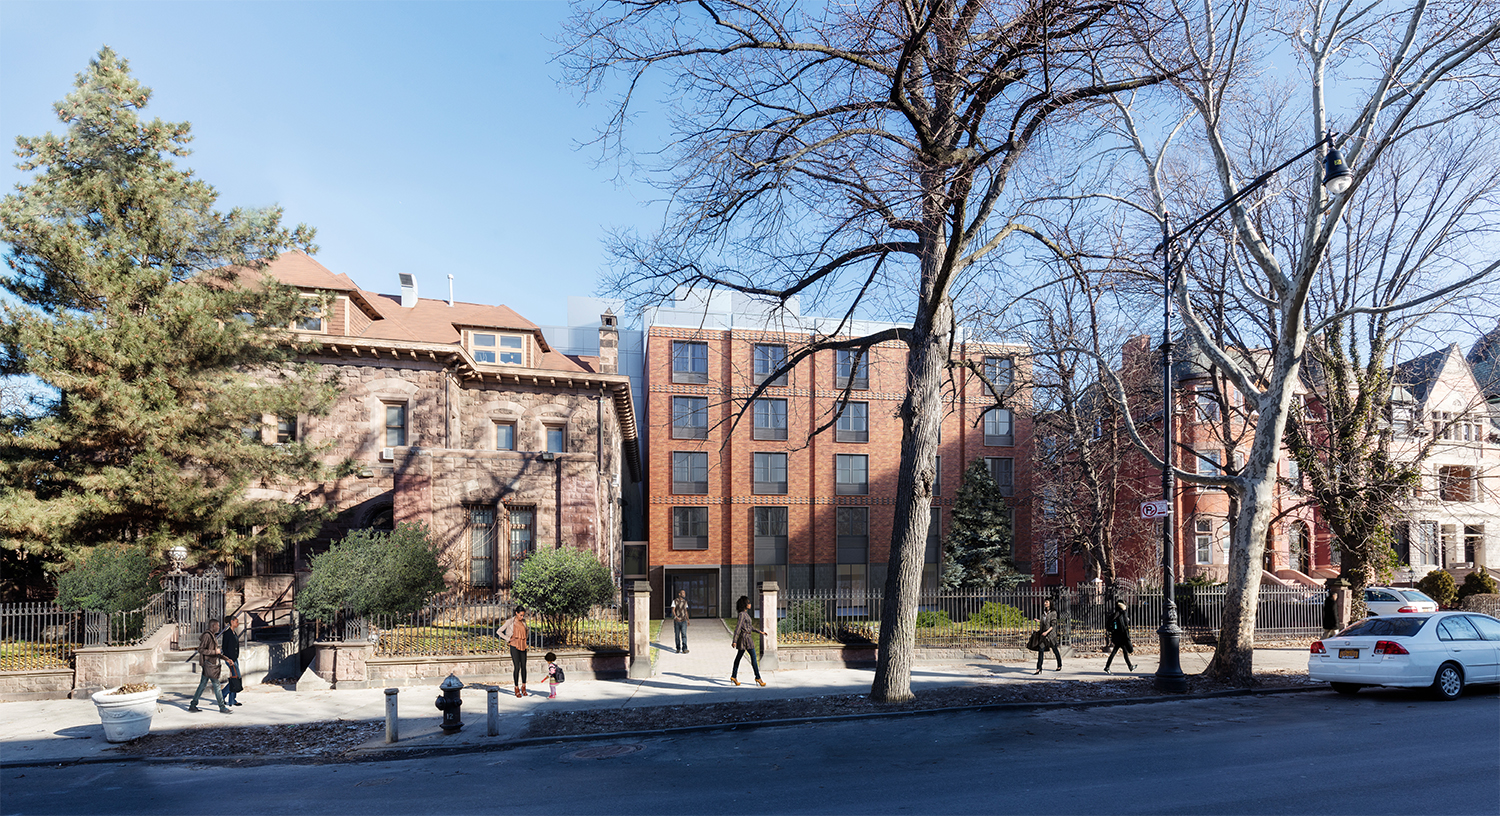 Proposal for 839 St. Marks Avenue, as seen from St. Marks Avenue